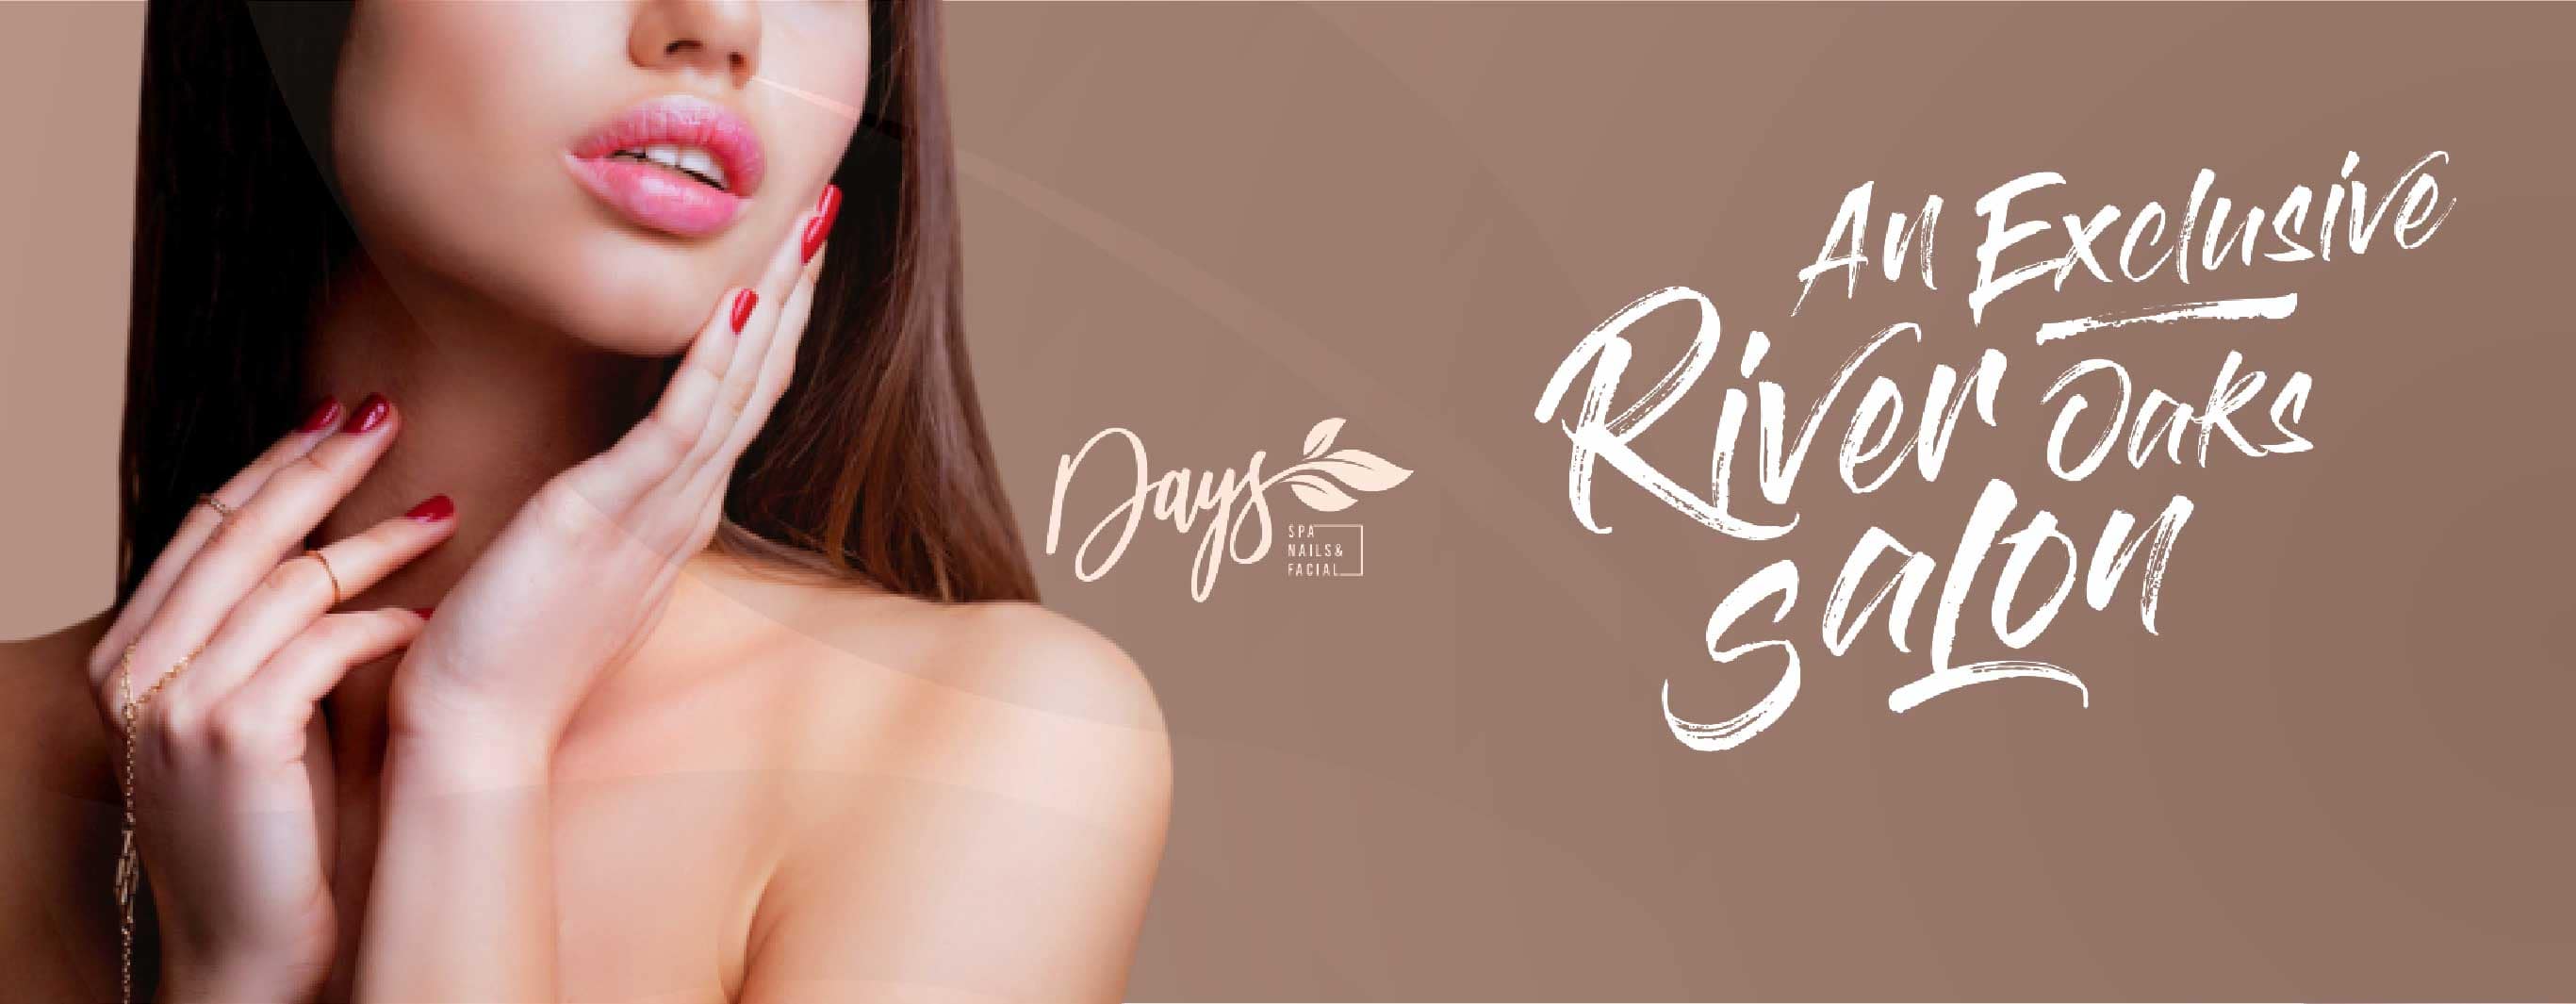 Days Spa Nail & Facial Additional Services